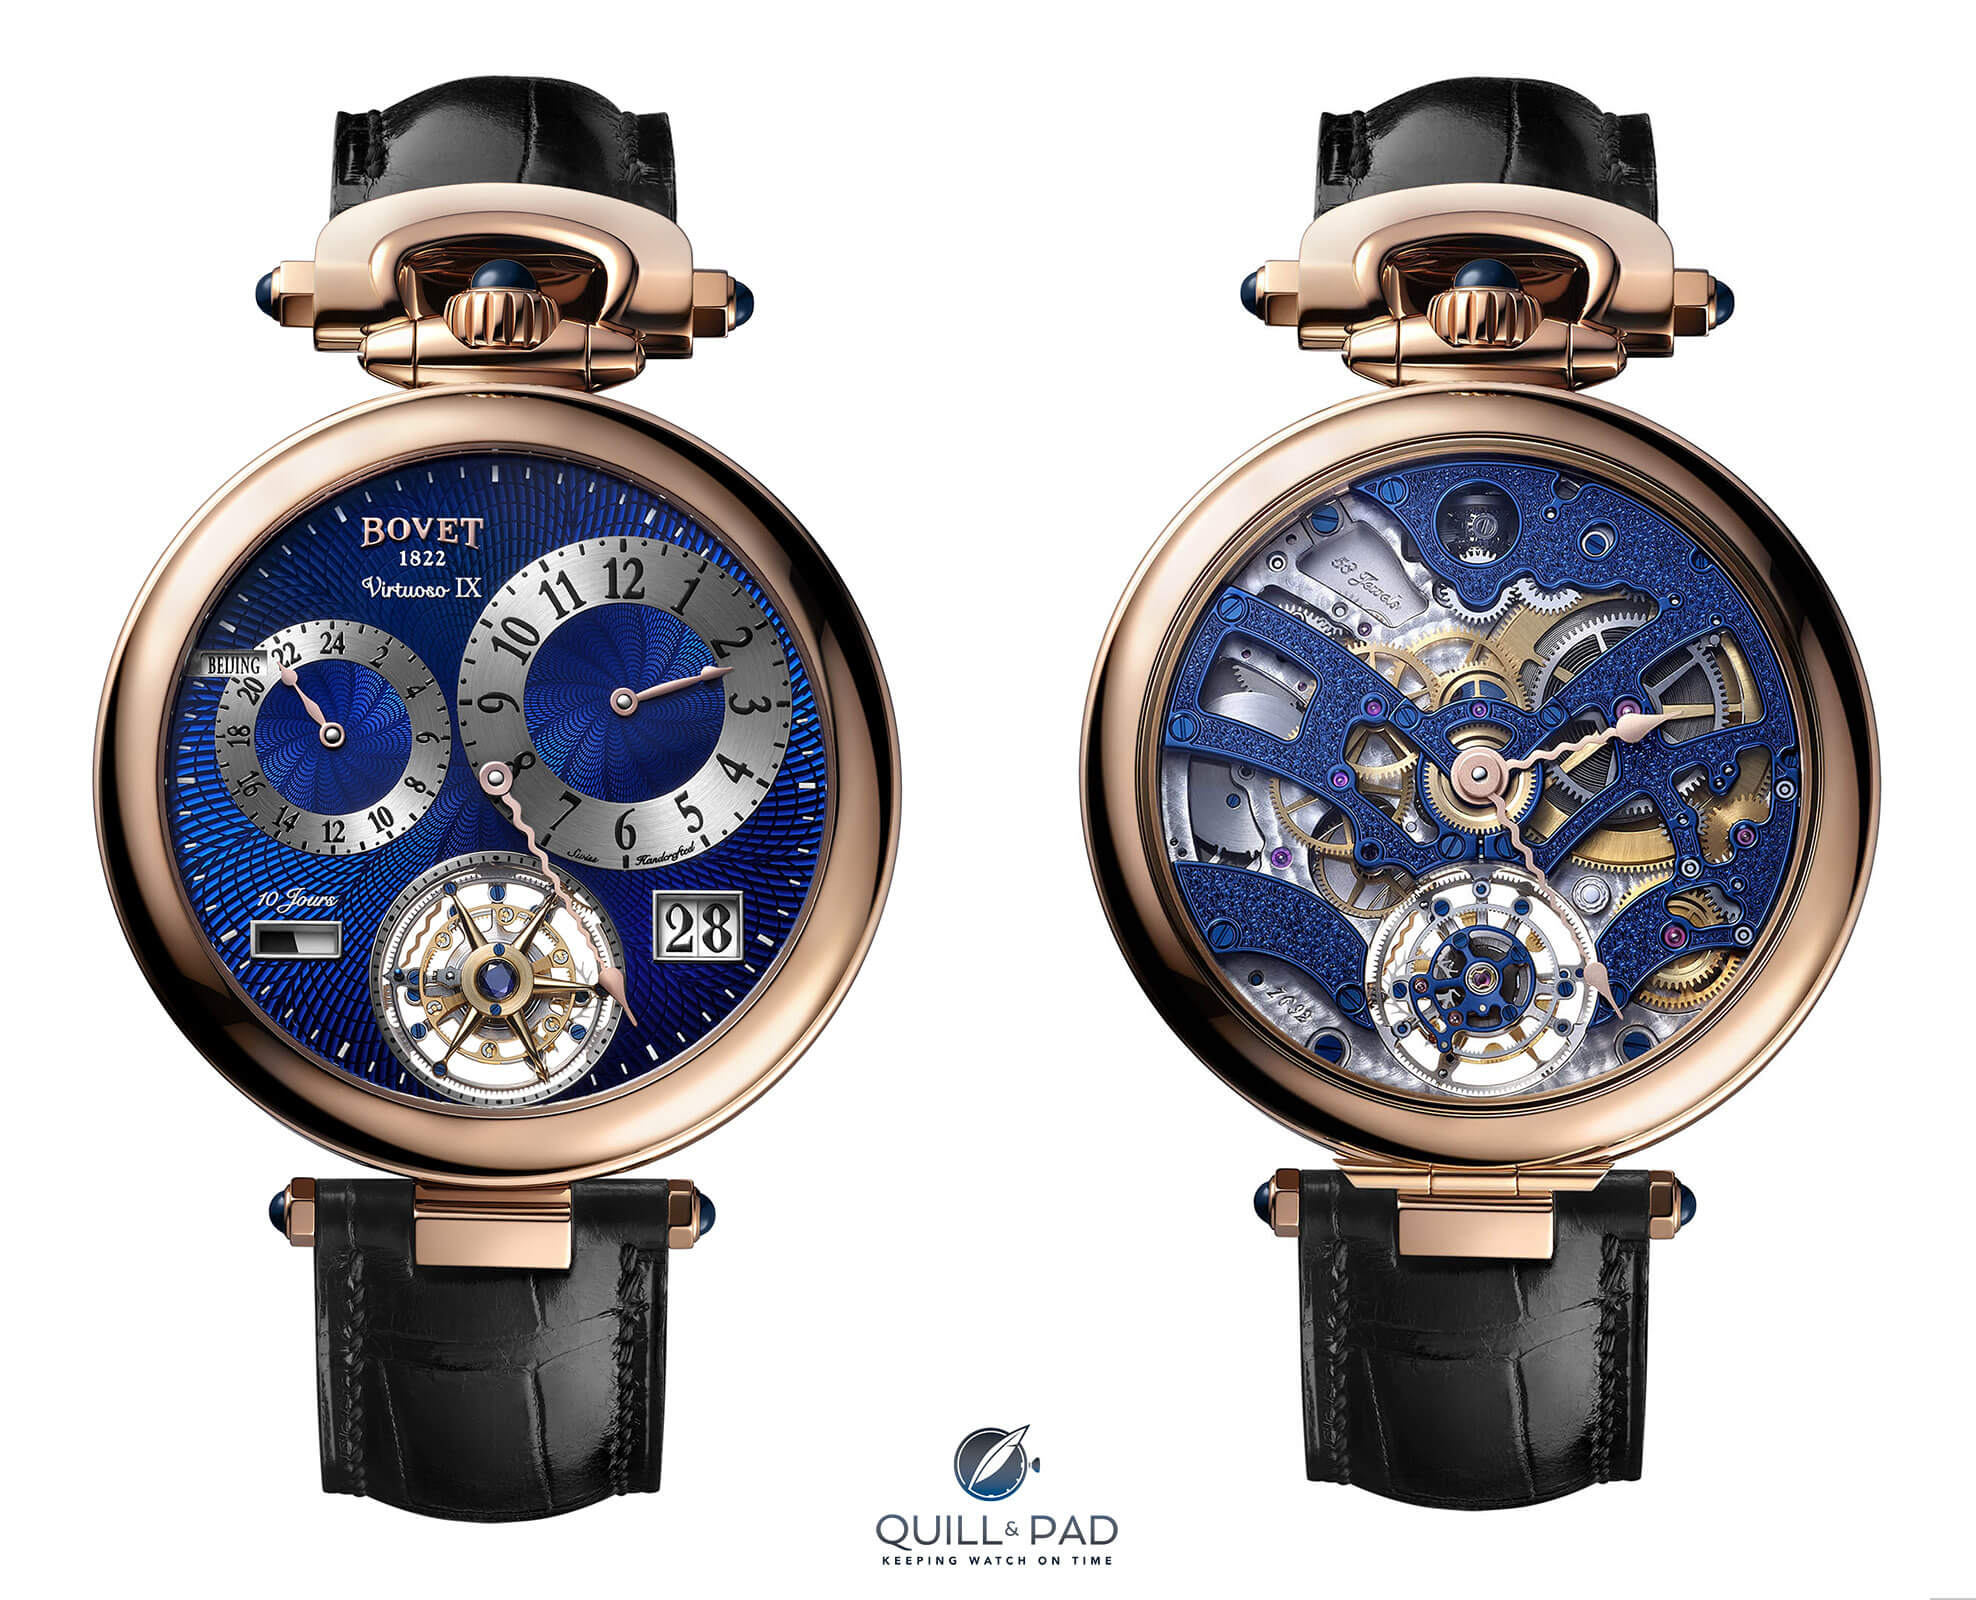 Two faces of the Bovet Virtuoso IX